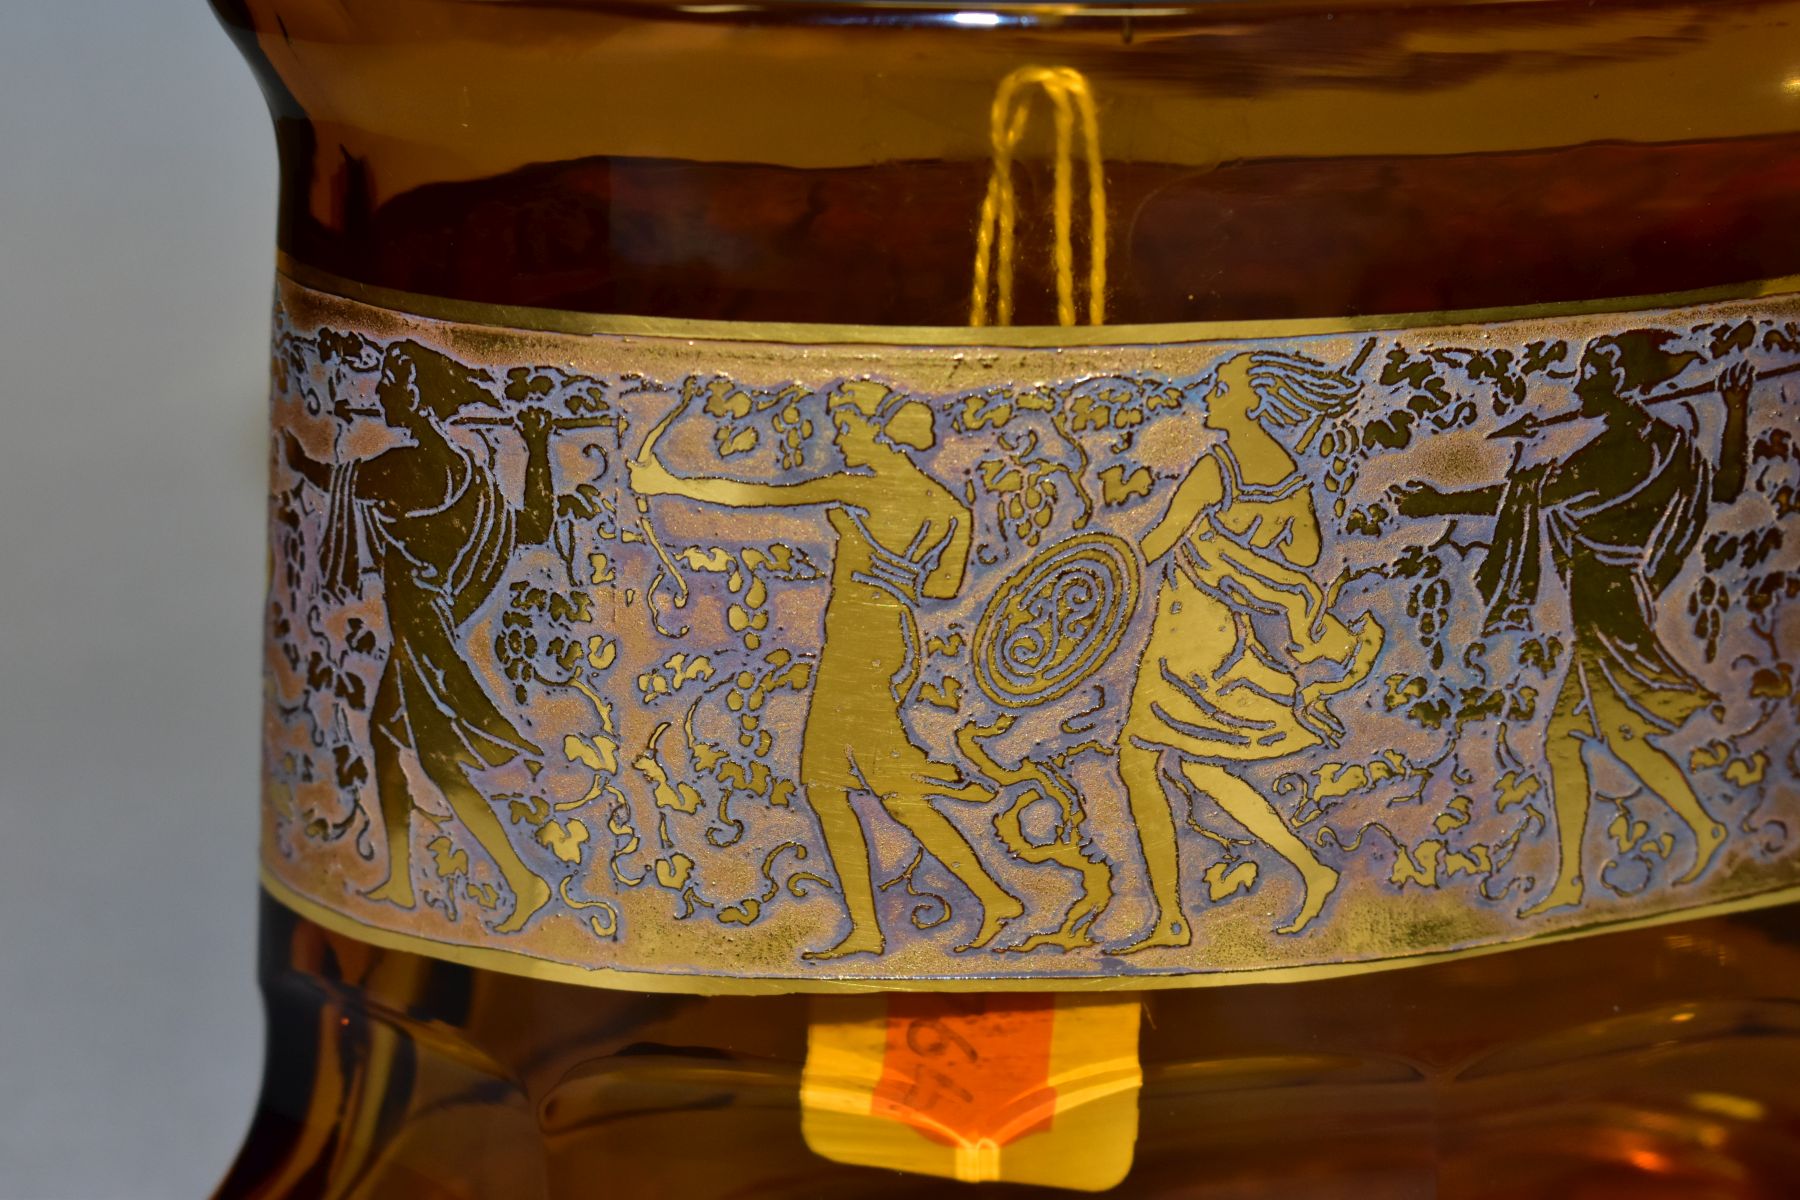 A MOSER OVAL AMBER GLASS VASE, with a gilt band of relief decorated Amazons with spears, shields and - Image 2 of 8